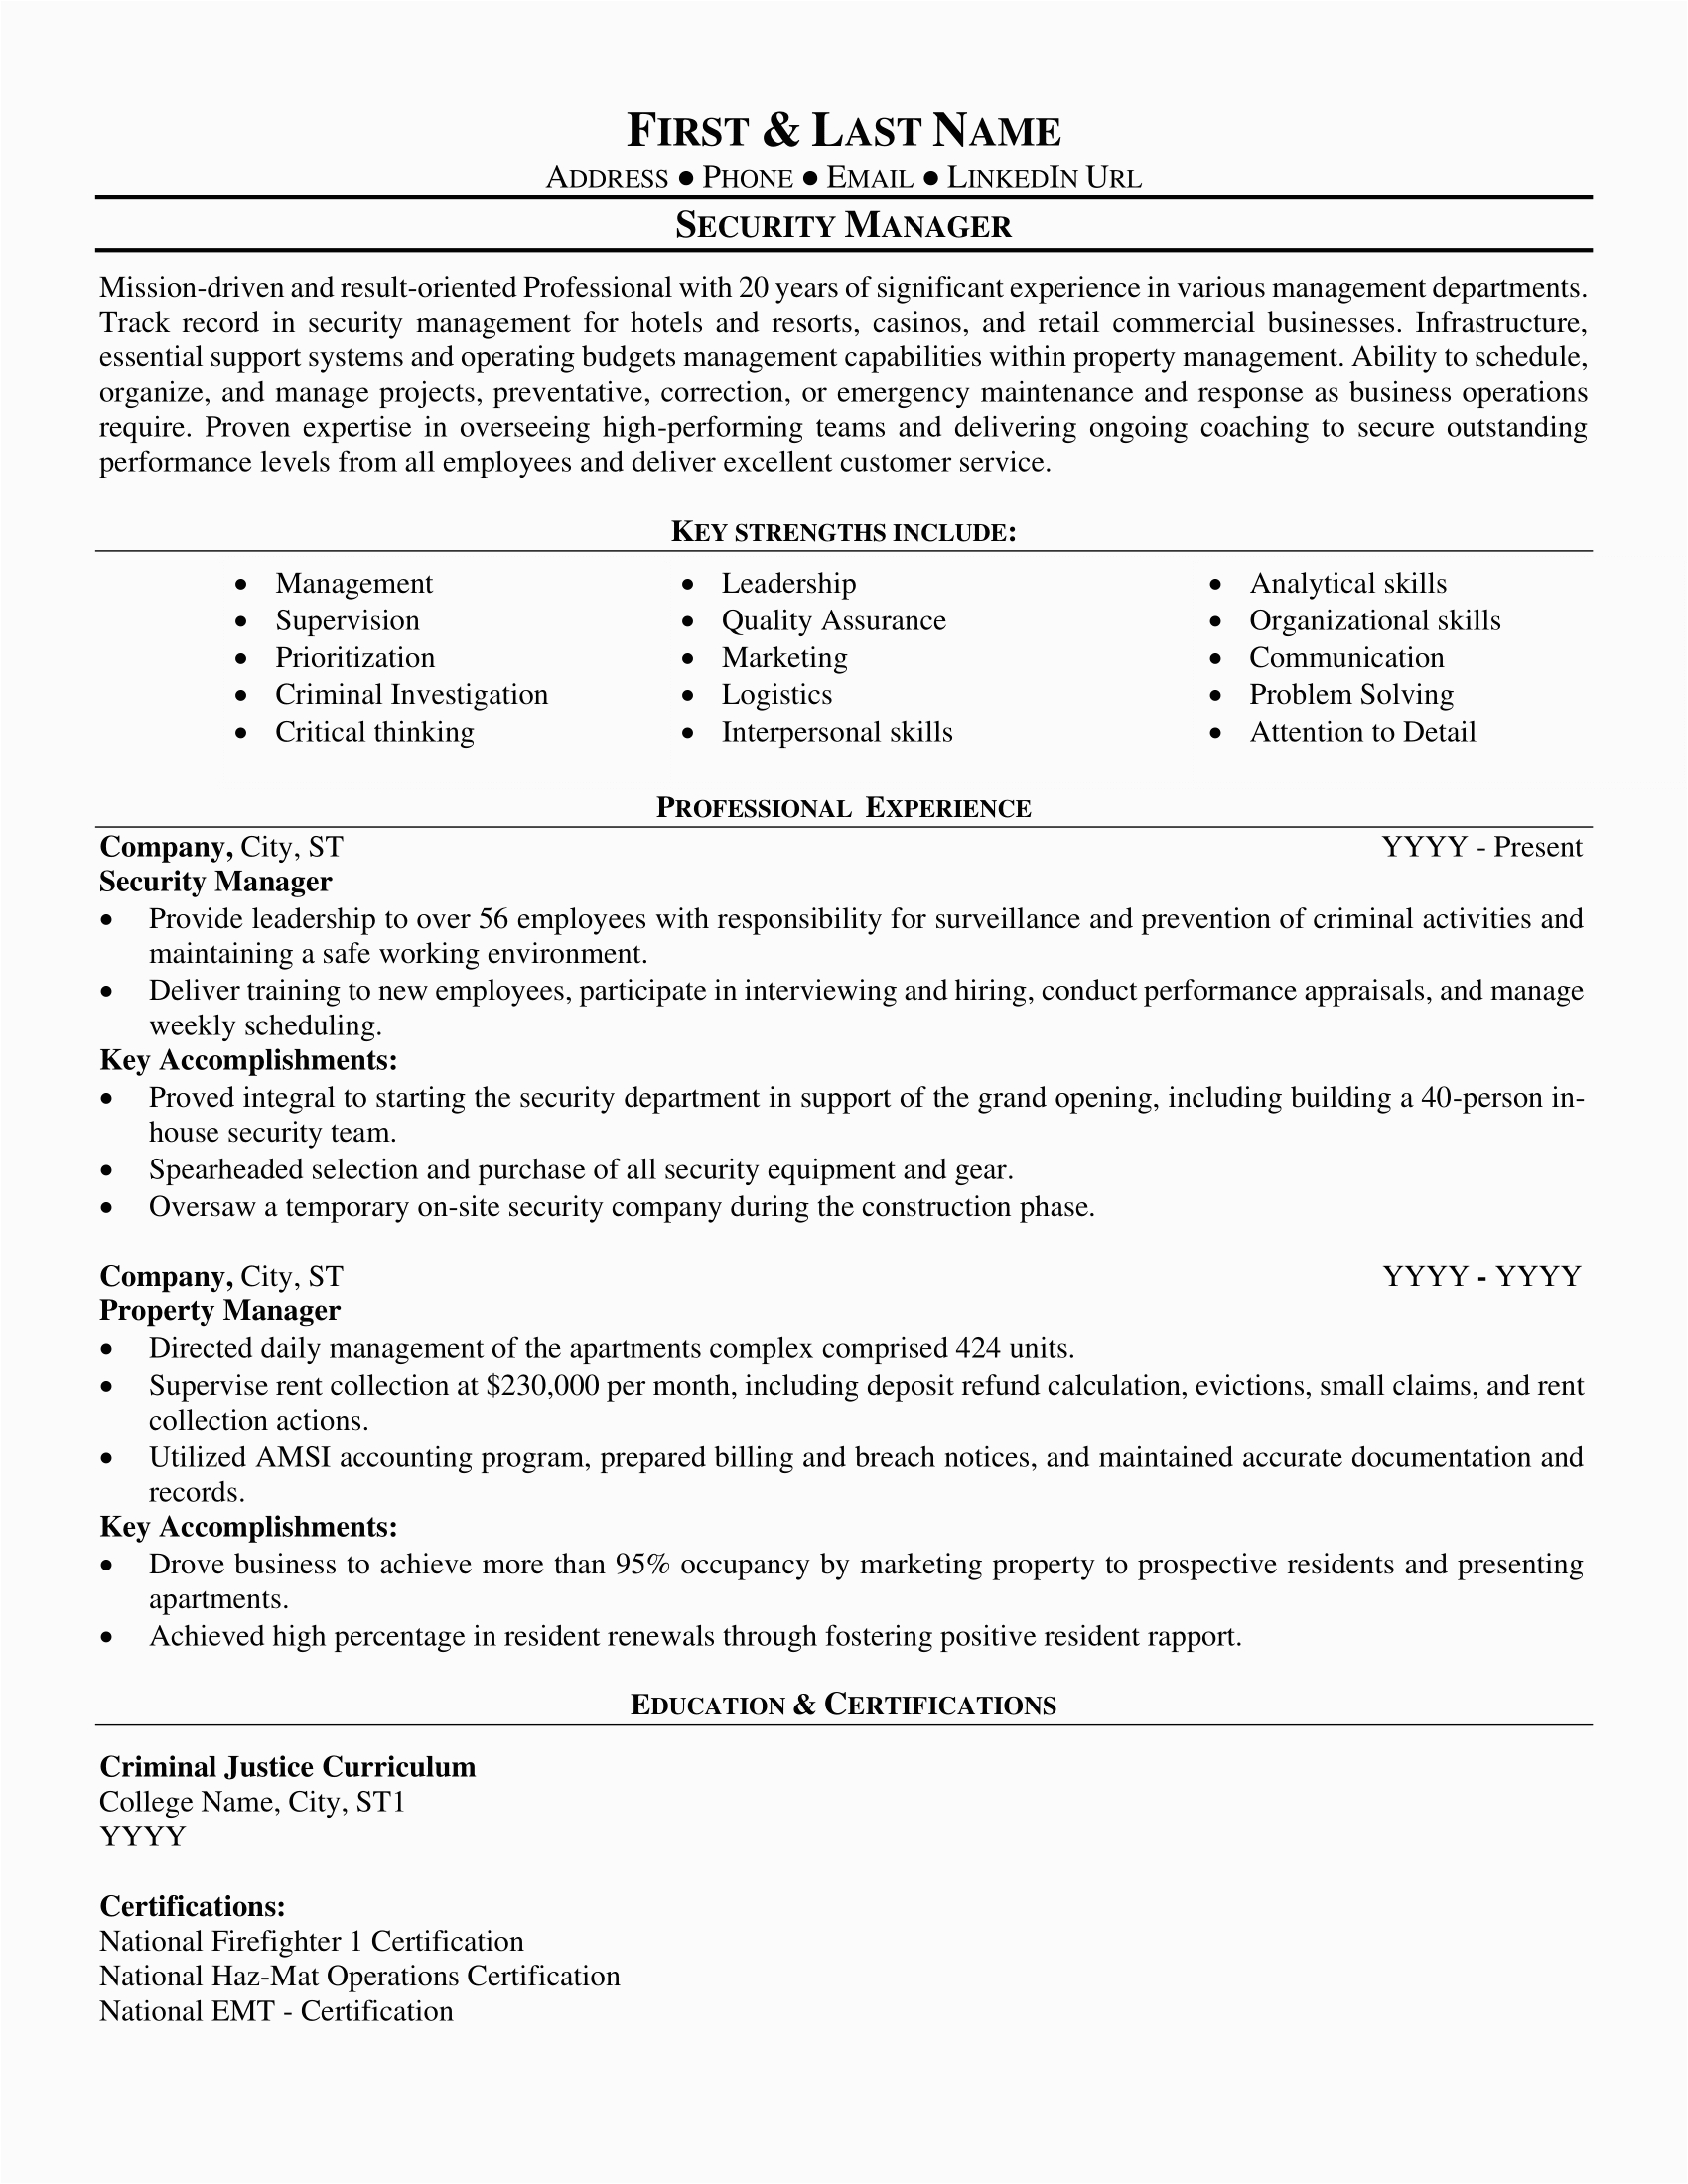 Sample Resume for Security Manager Position Security Manager Resume Sample